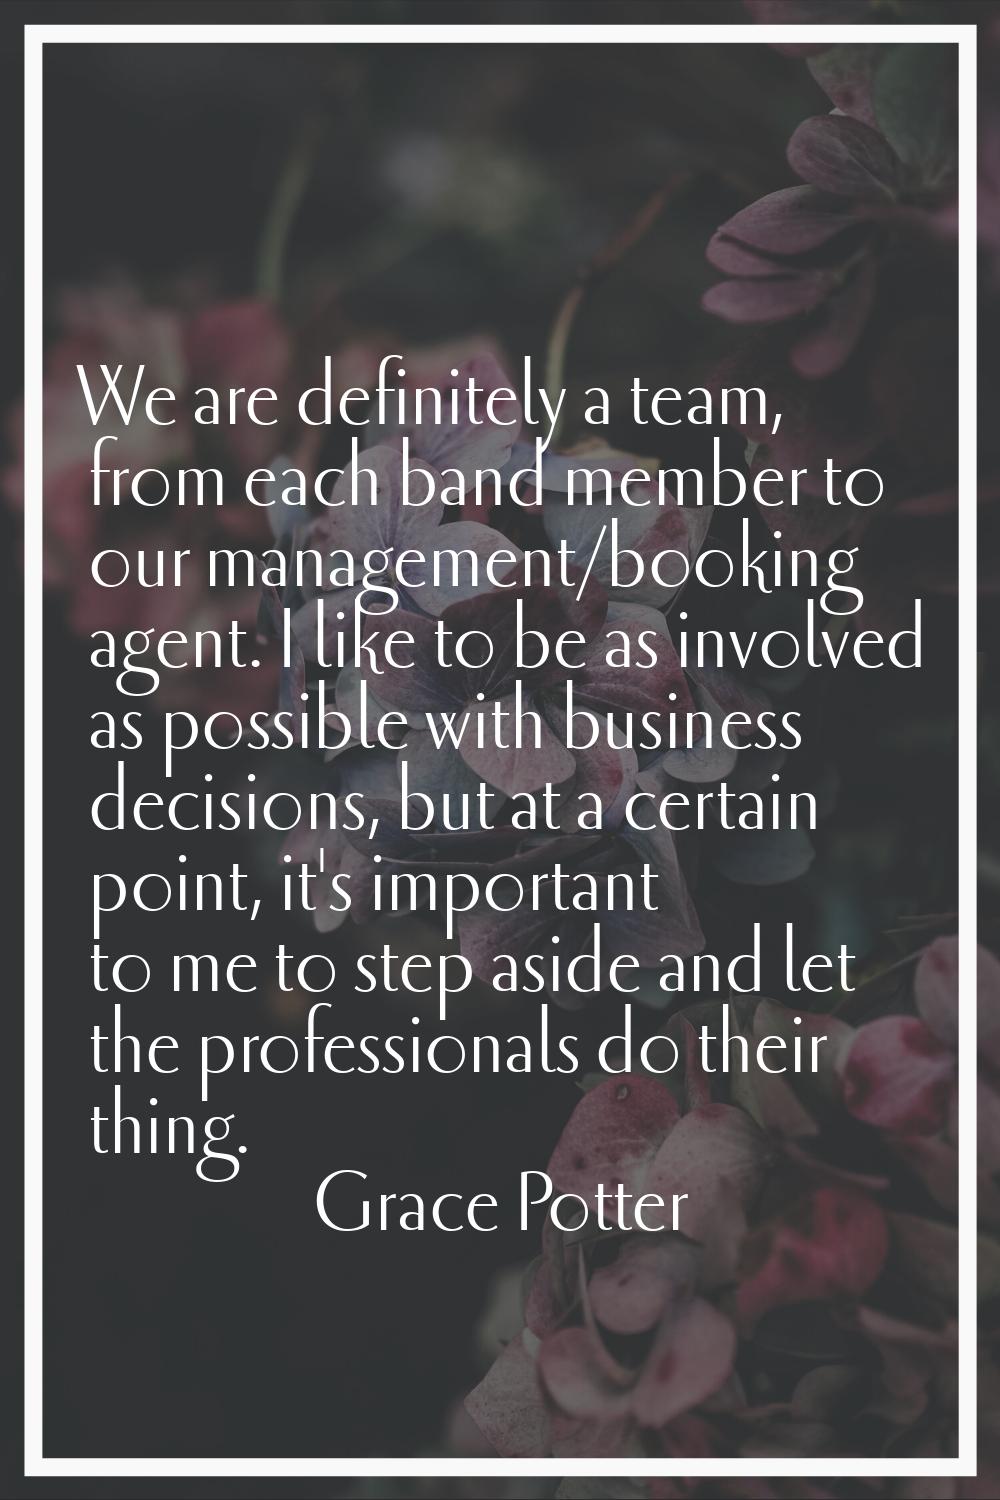 We are definitely a team, from each band member to our management/booking agent. I like to be as in